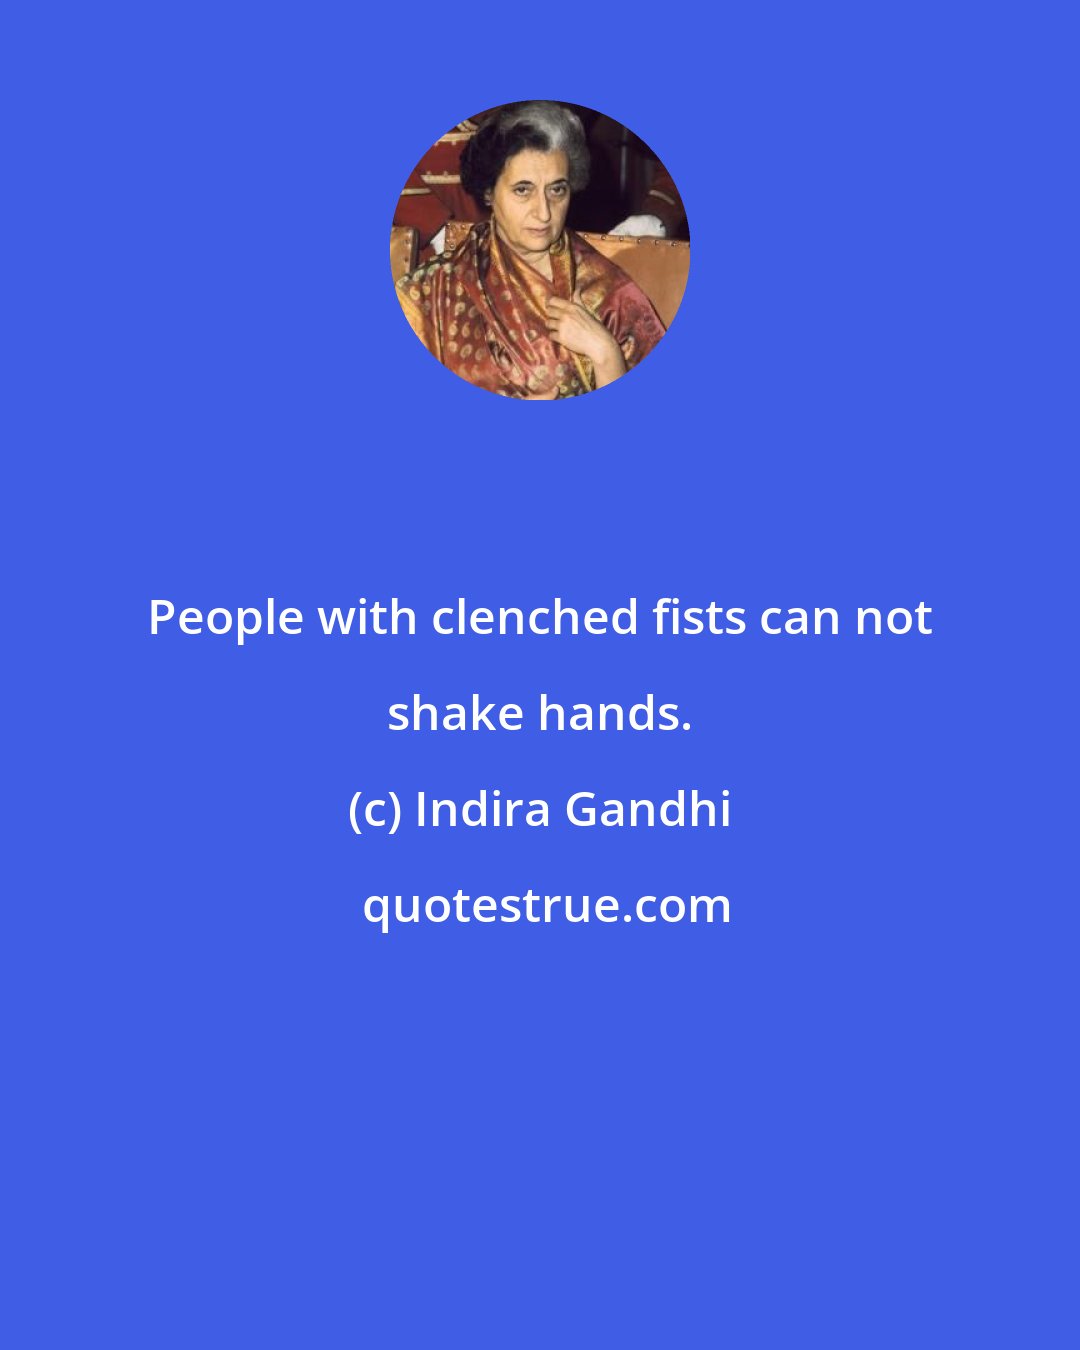 Indira Gandhi: People with clenched fists can not shake hands.